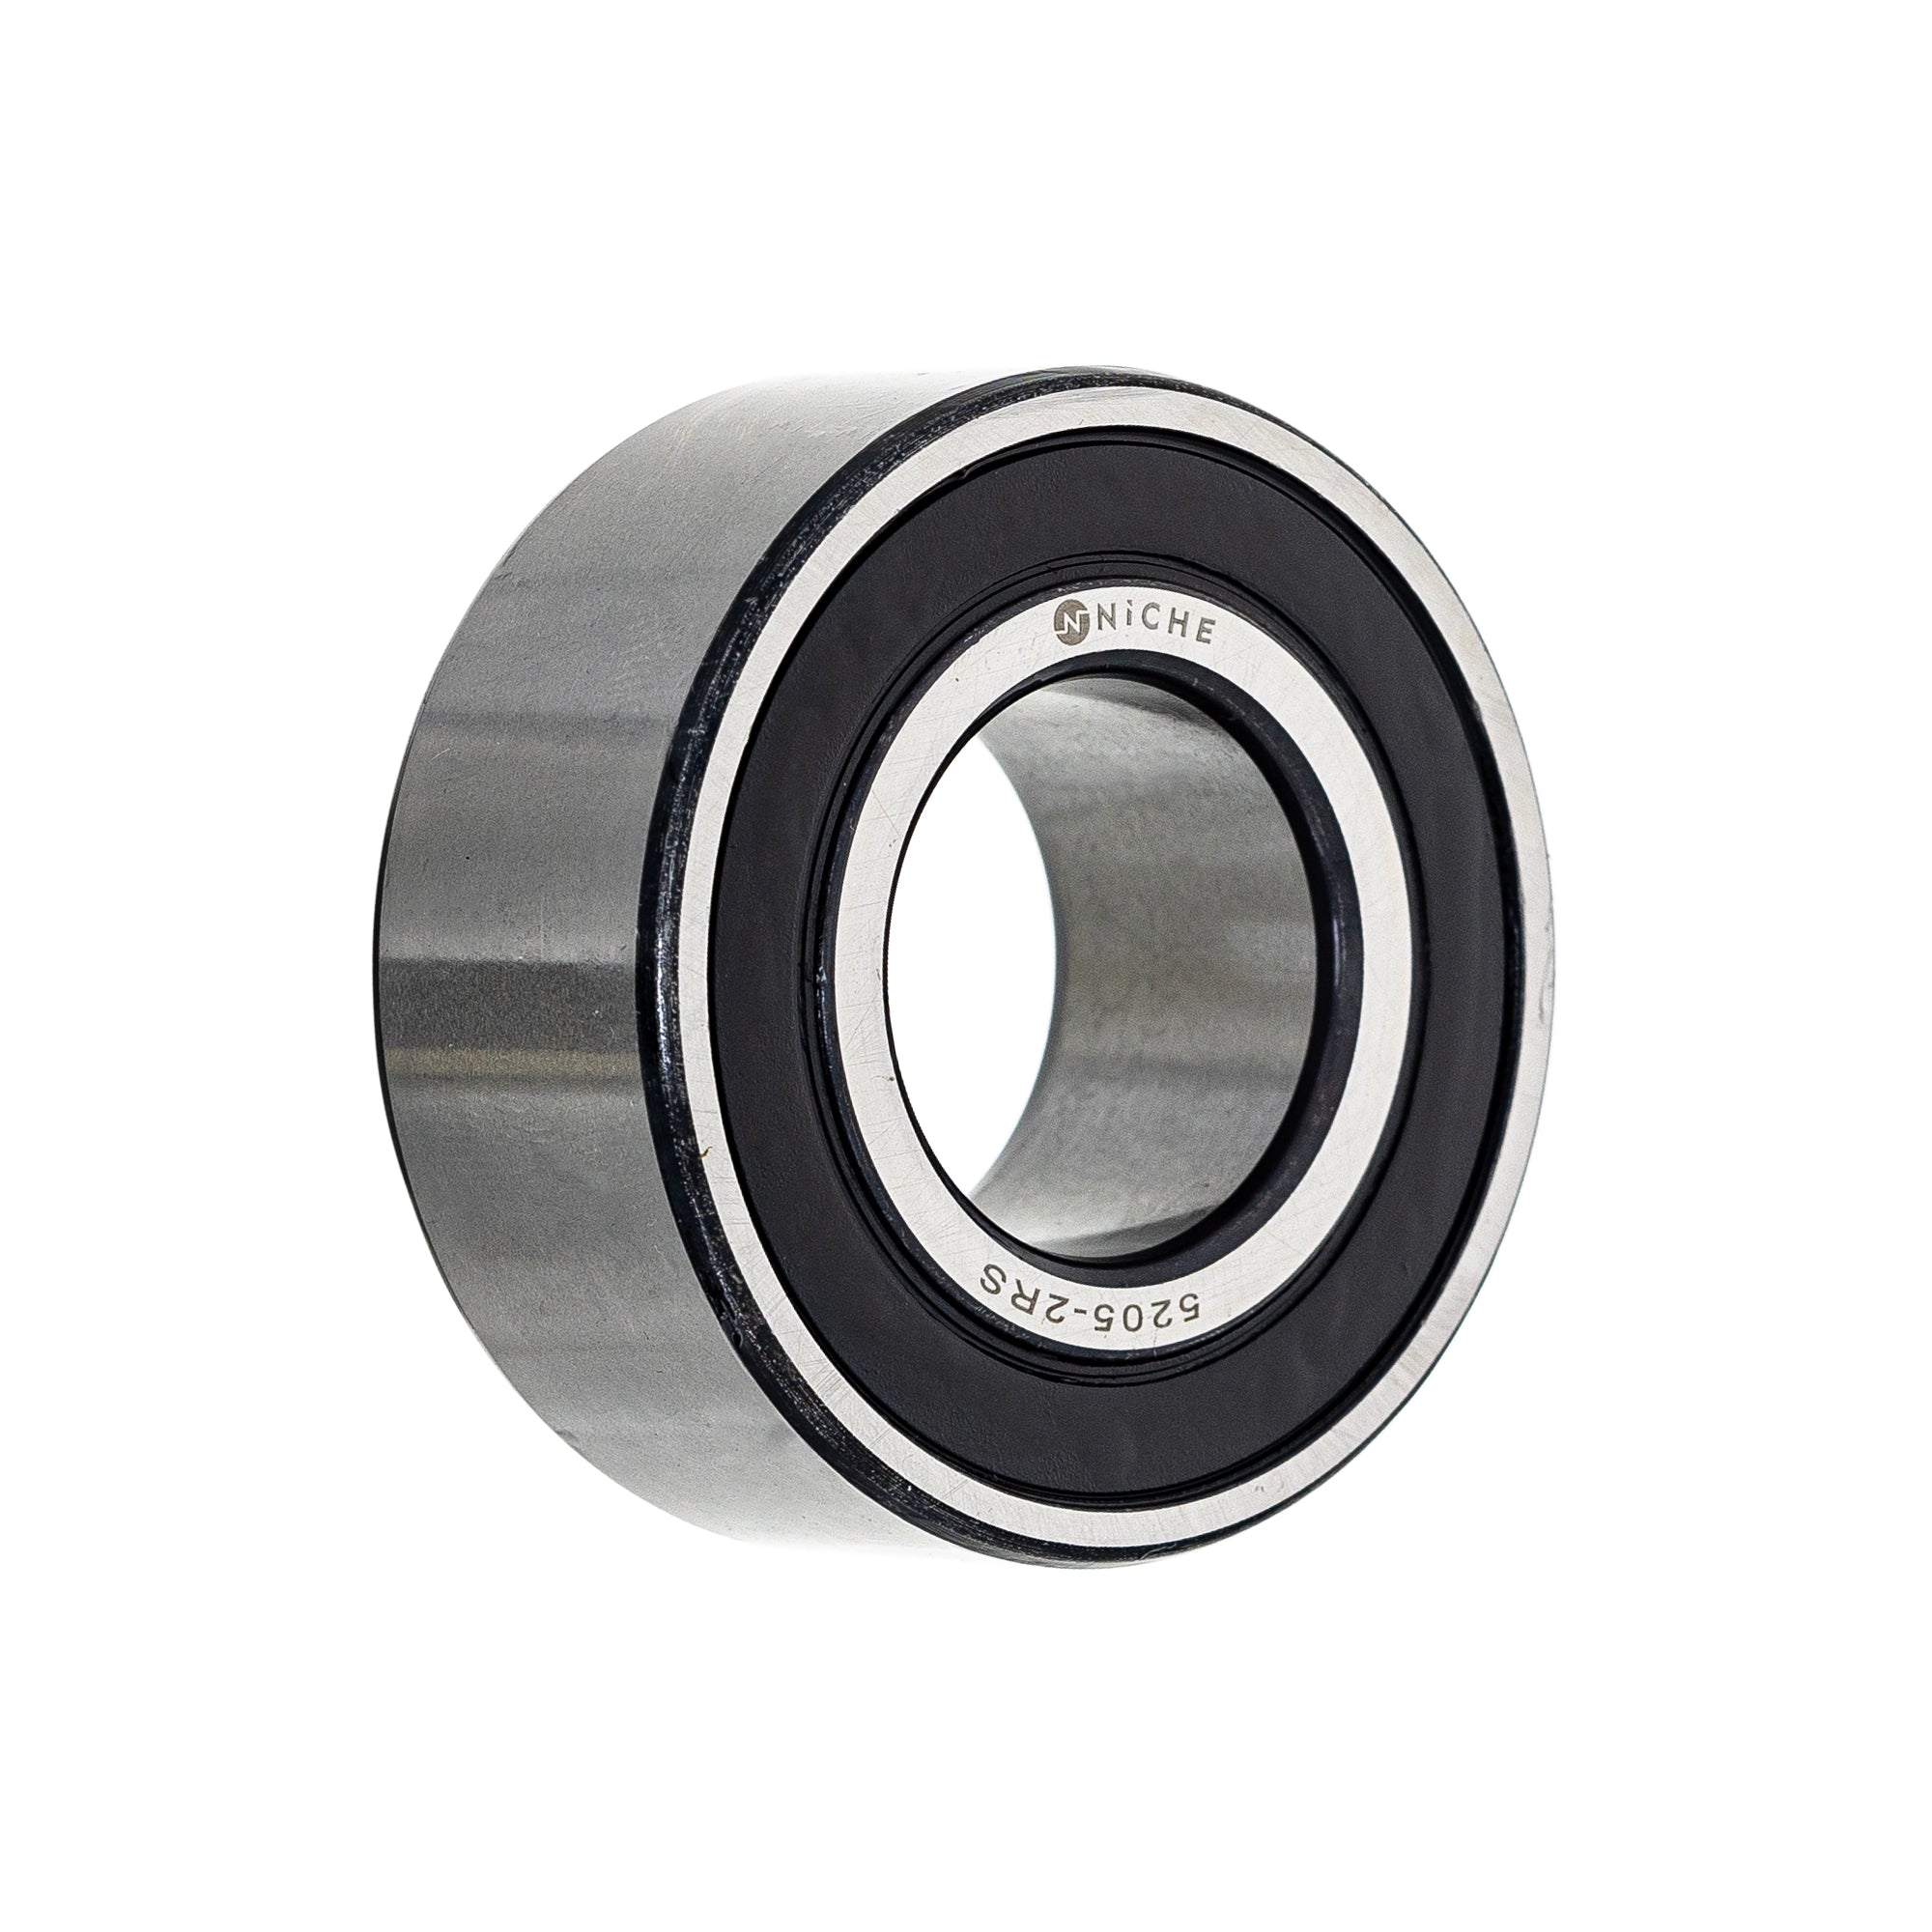 Double Row, Angular Contact, Ball Bearing for zOTHER K1100RS K1 NICHE 519-CBB2279R